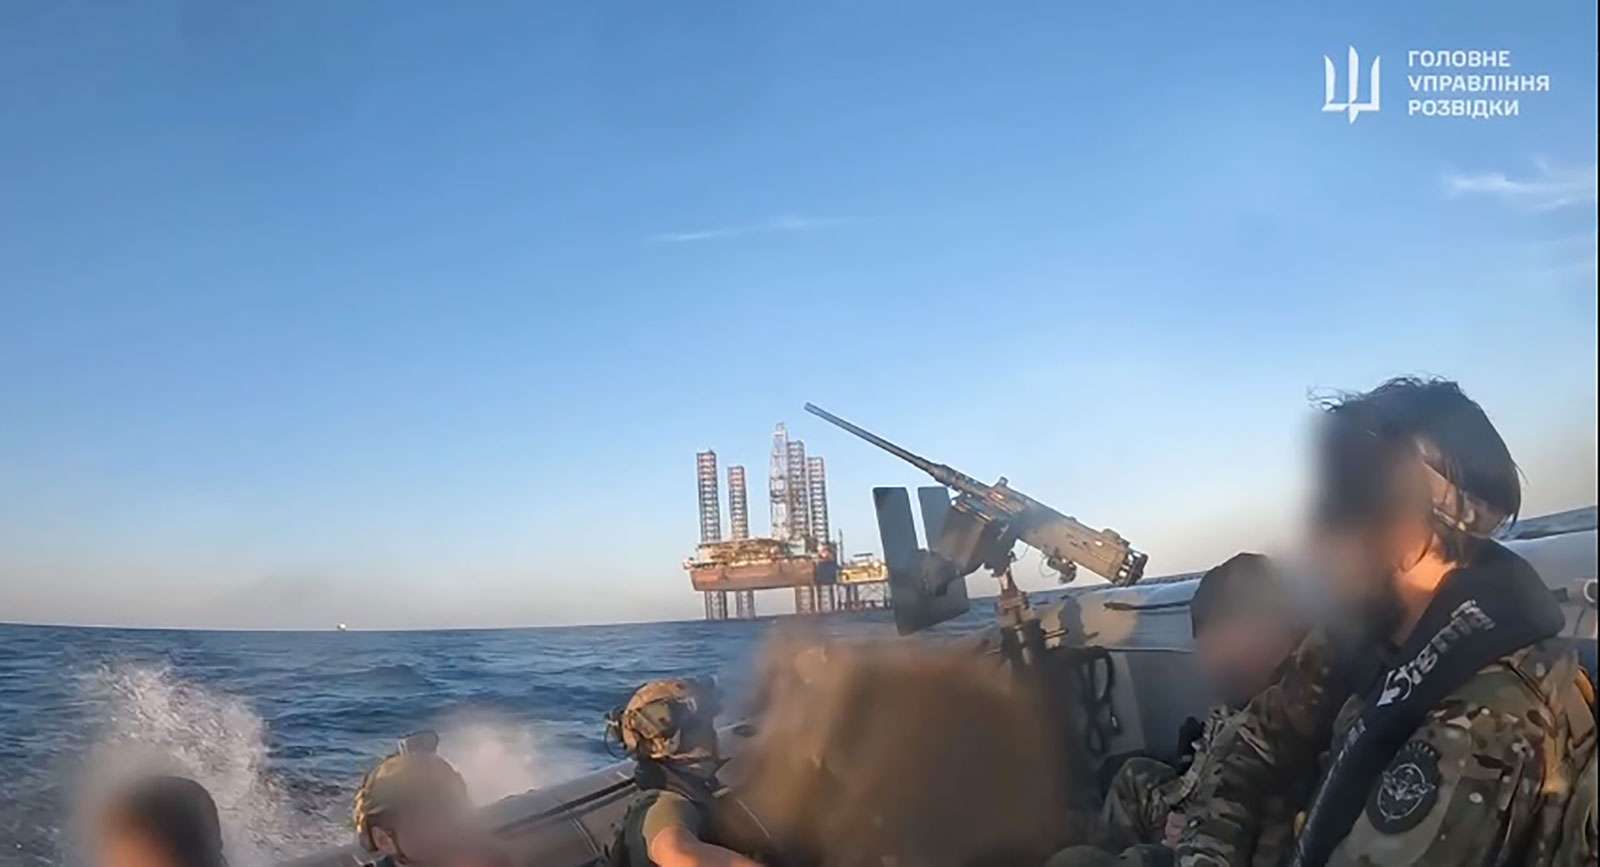 A screengrab from a video released by the Ukraine Defense Intelligence shows Ukrainian special forces during an operation to take control of Bokyo Towers off the northwest coast of Crimea. Portions of this image have been blurred by the Ukraine Defense Intelligence.